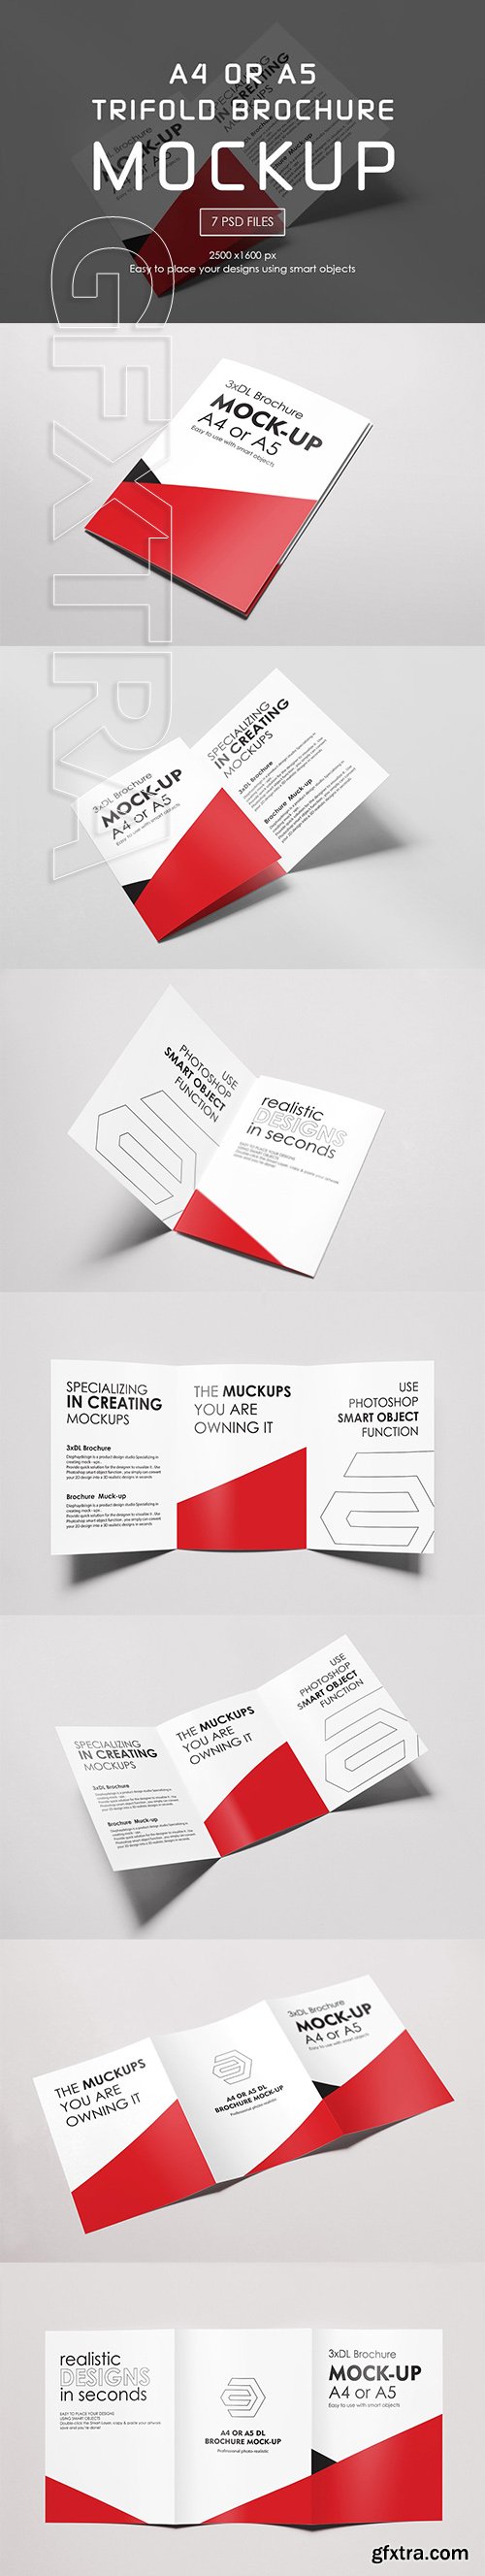 CreativeMarket - A4 or A5 Trifold Mockups 3210840